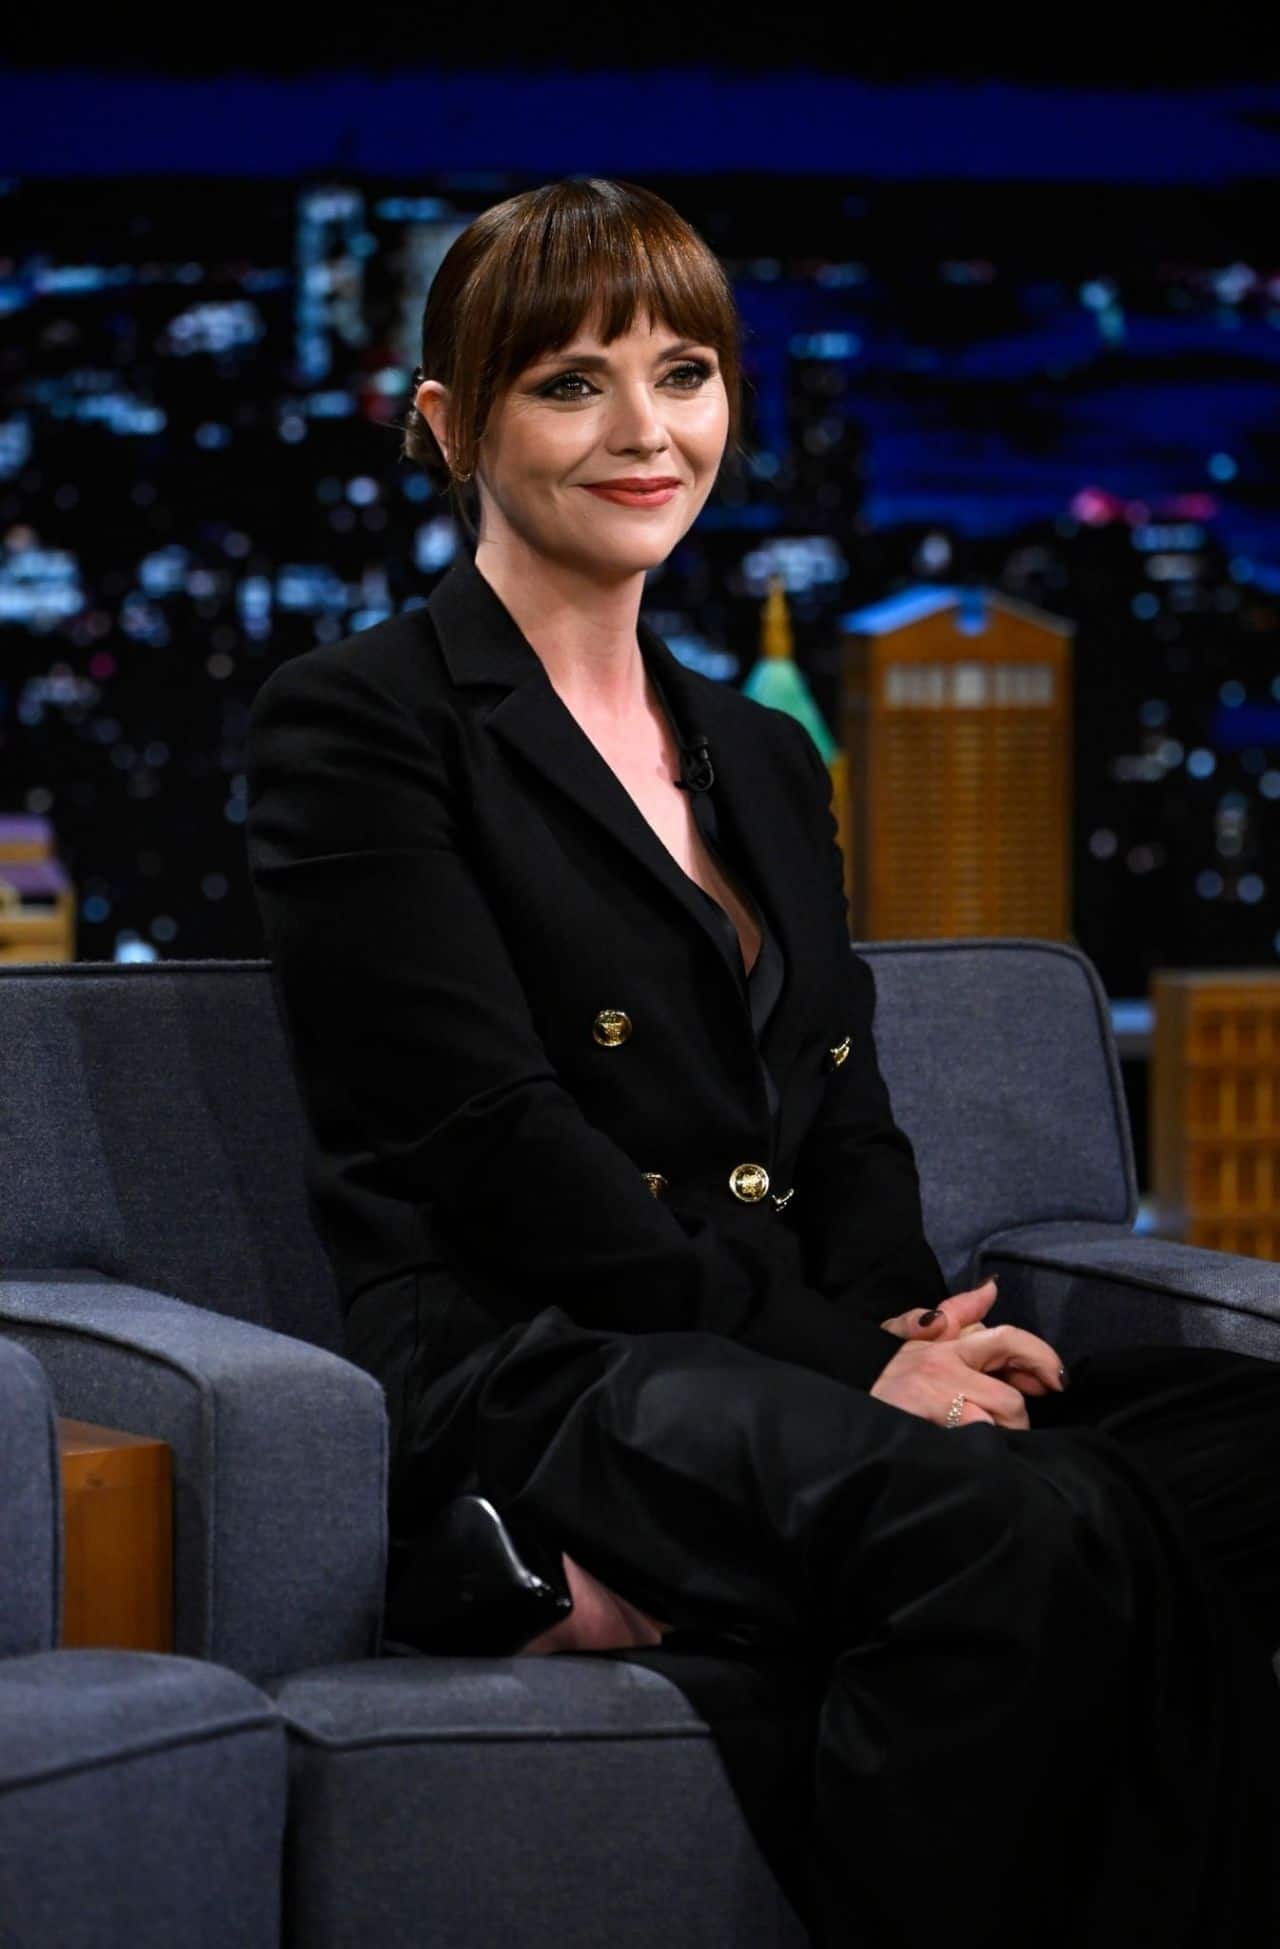 Christina Ricci Talks About her Movie "Monstrous" with Jimmy Fallon